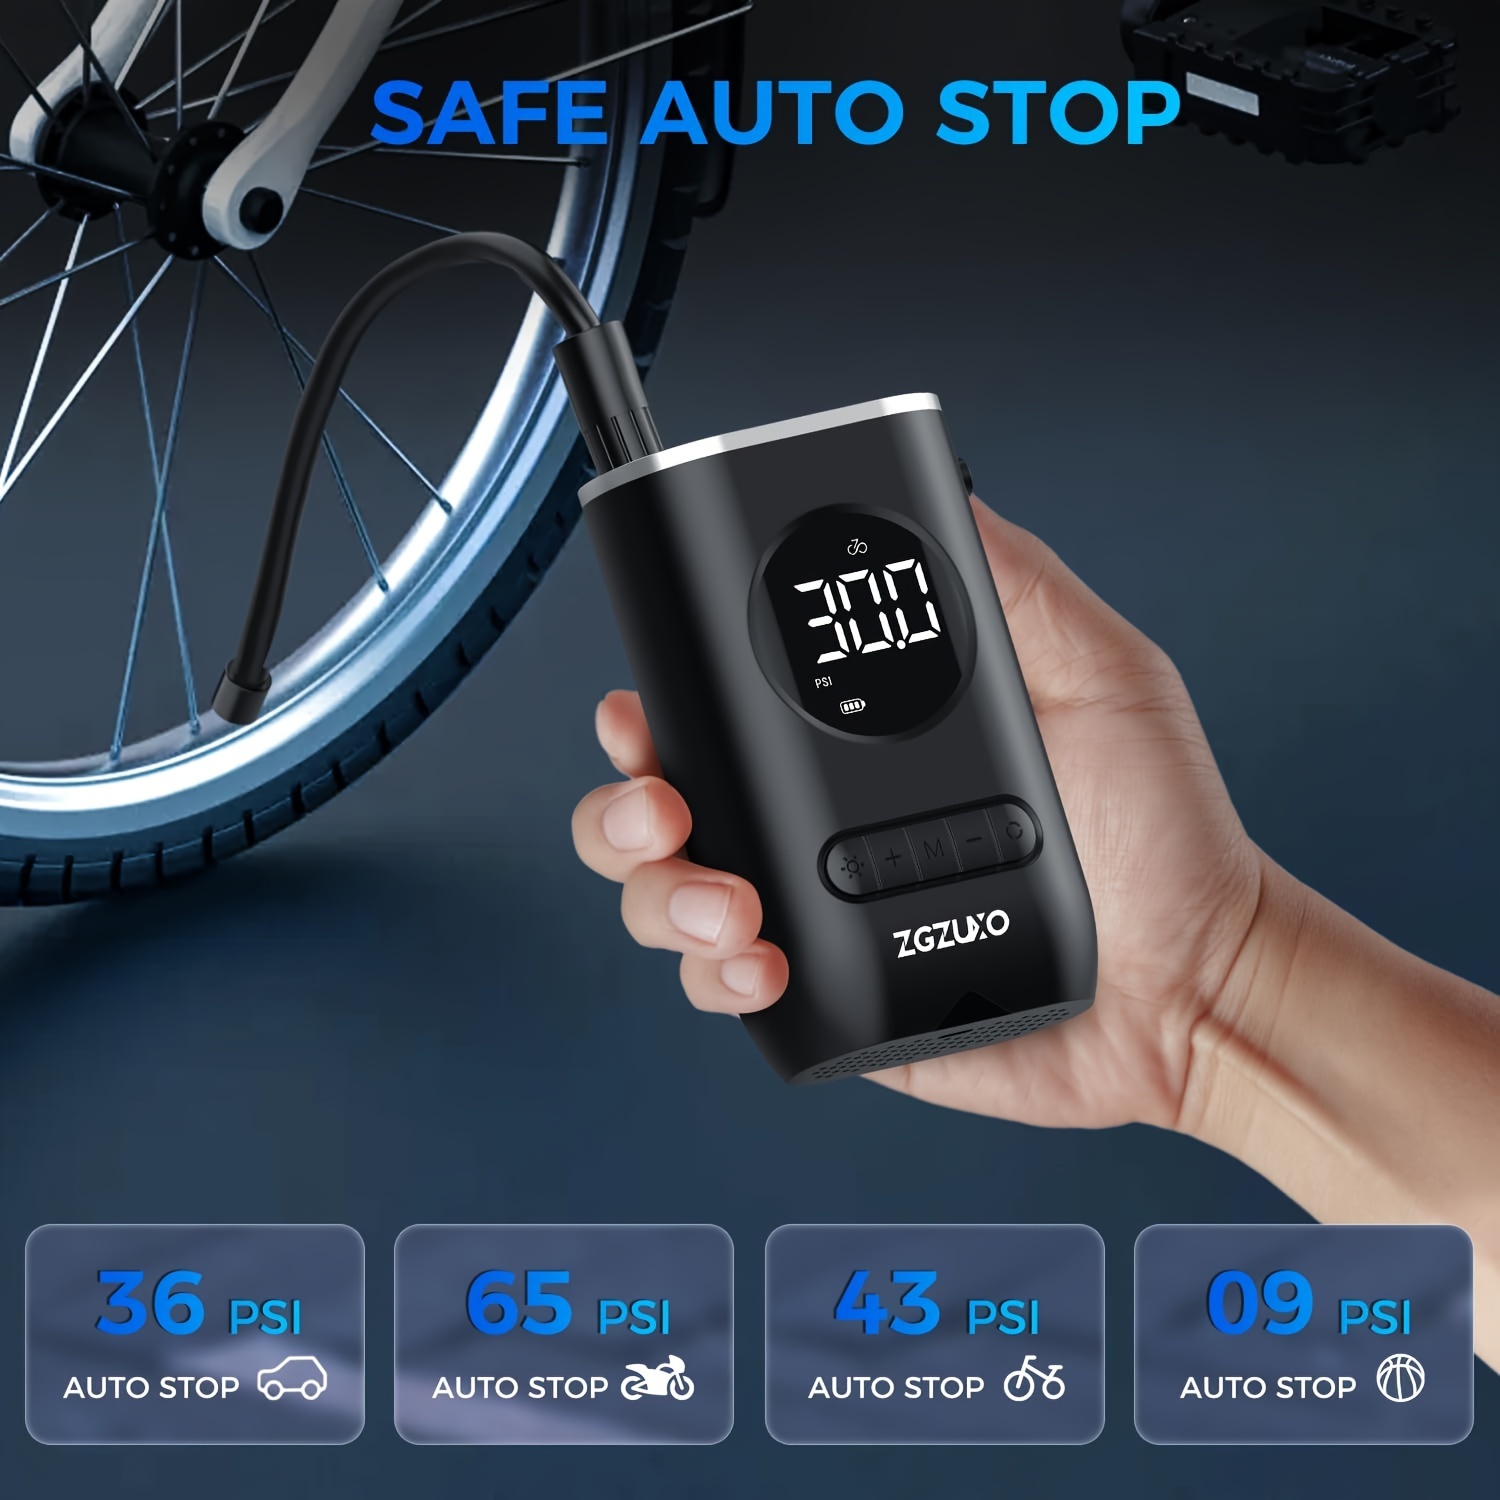 

Zgzuxo Tire Inflator Portable Air Compressor - 150psi Cordless Air Pump For Car Tires With Pressure Gauge Led Light, Electric Bike Tire Pump For Car Motorcycle Bicycle Ball, Car Accessories